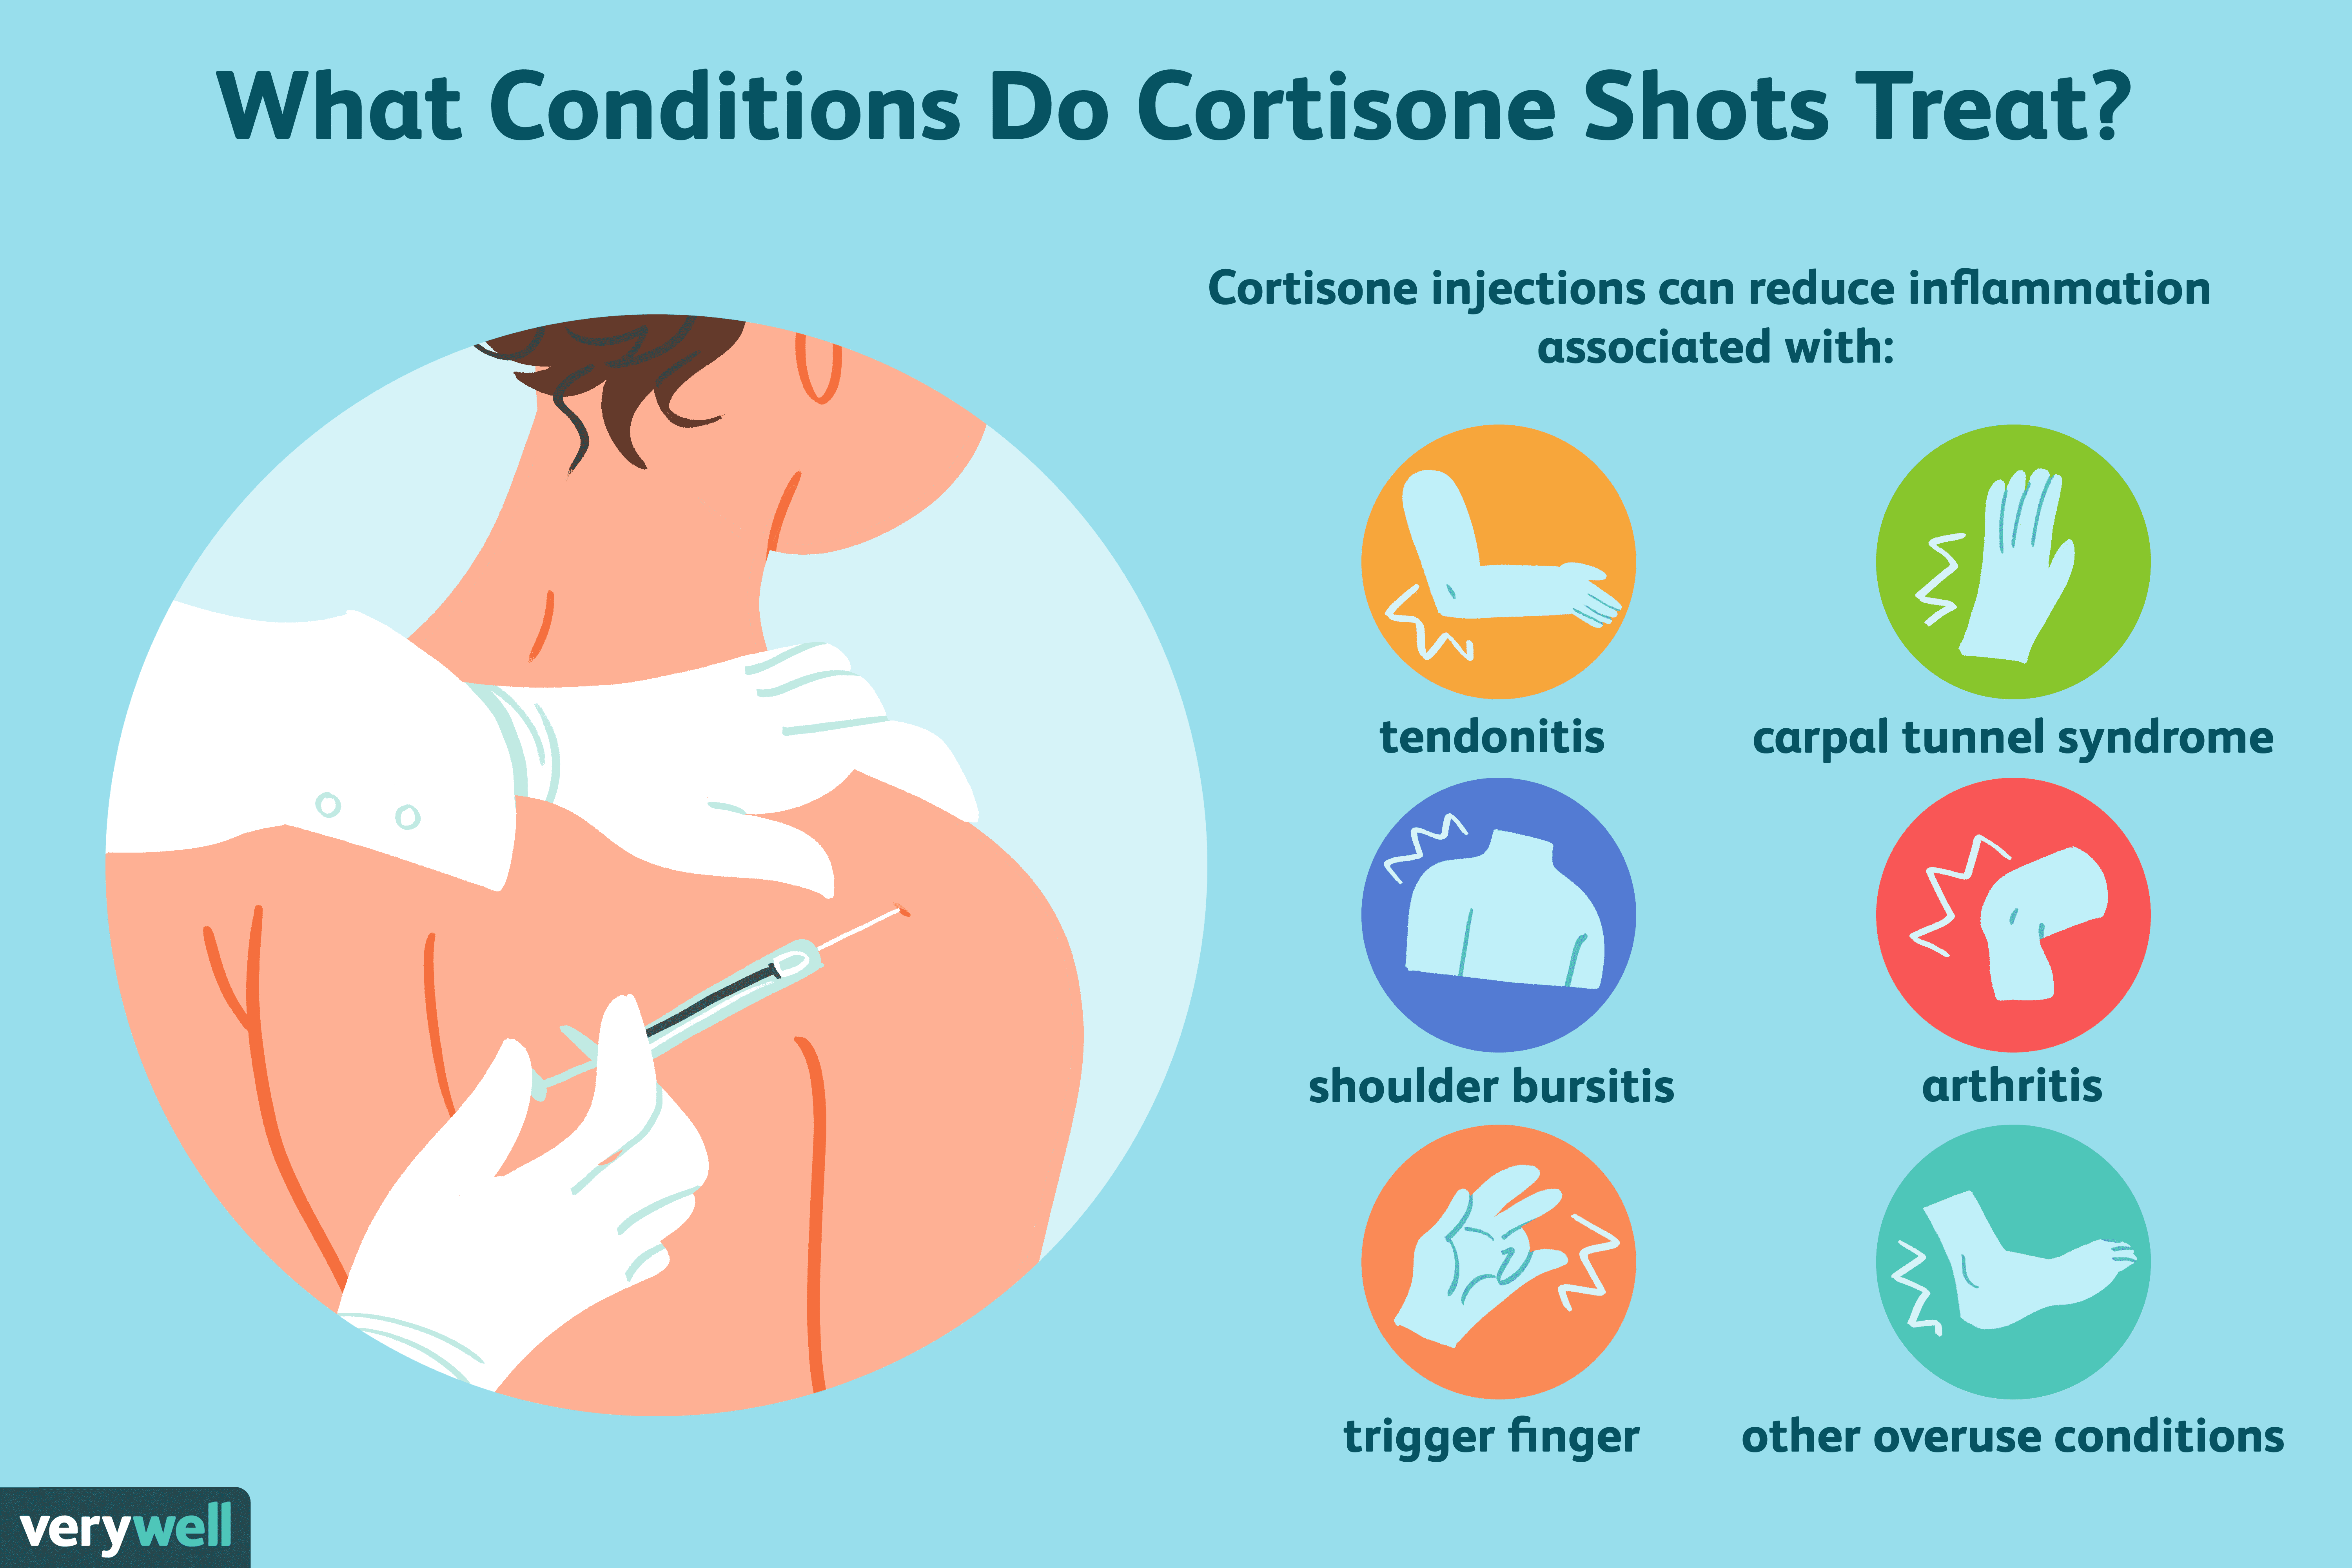 How Many Cortisone Shots Can You Have?